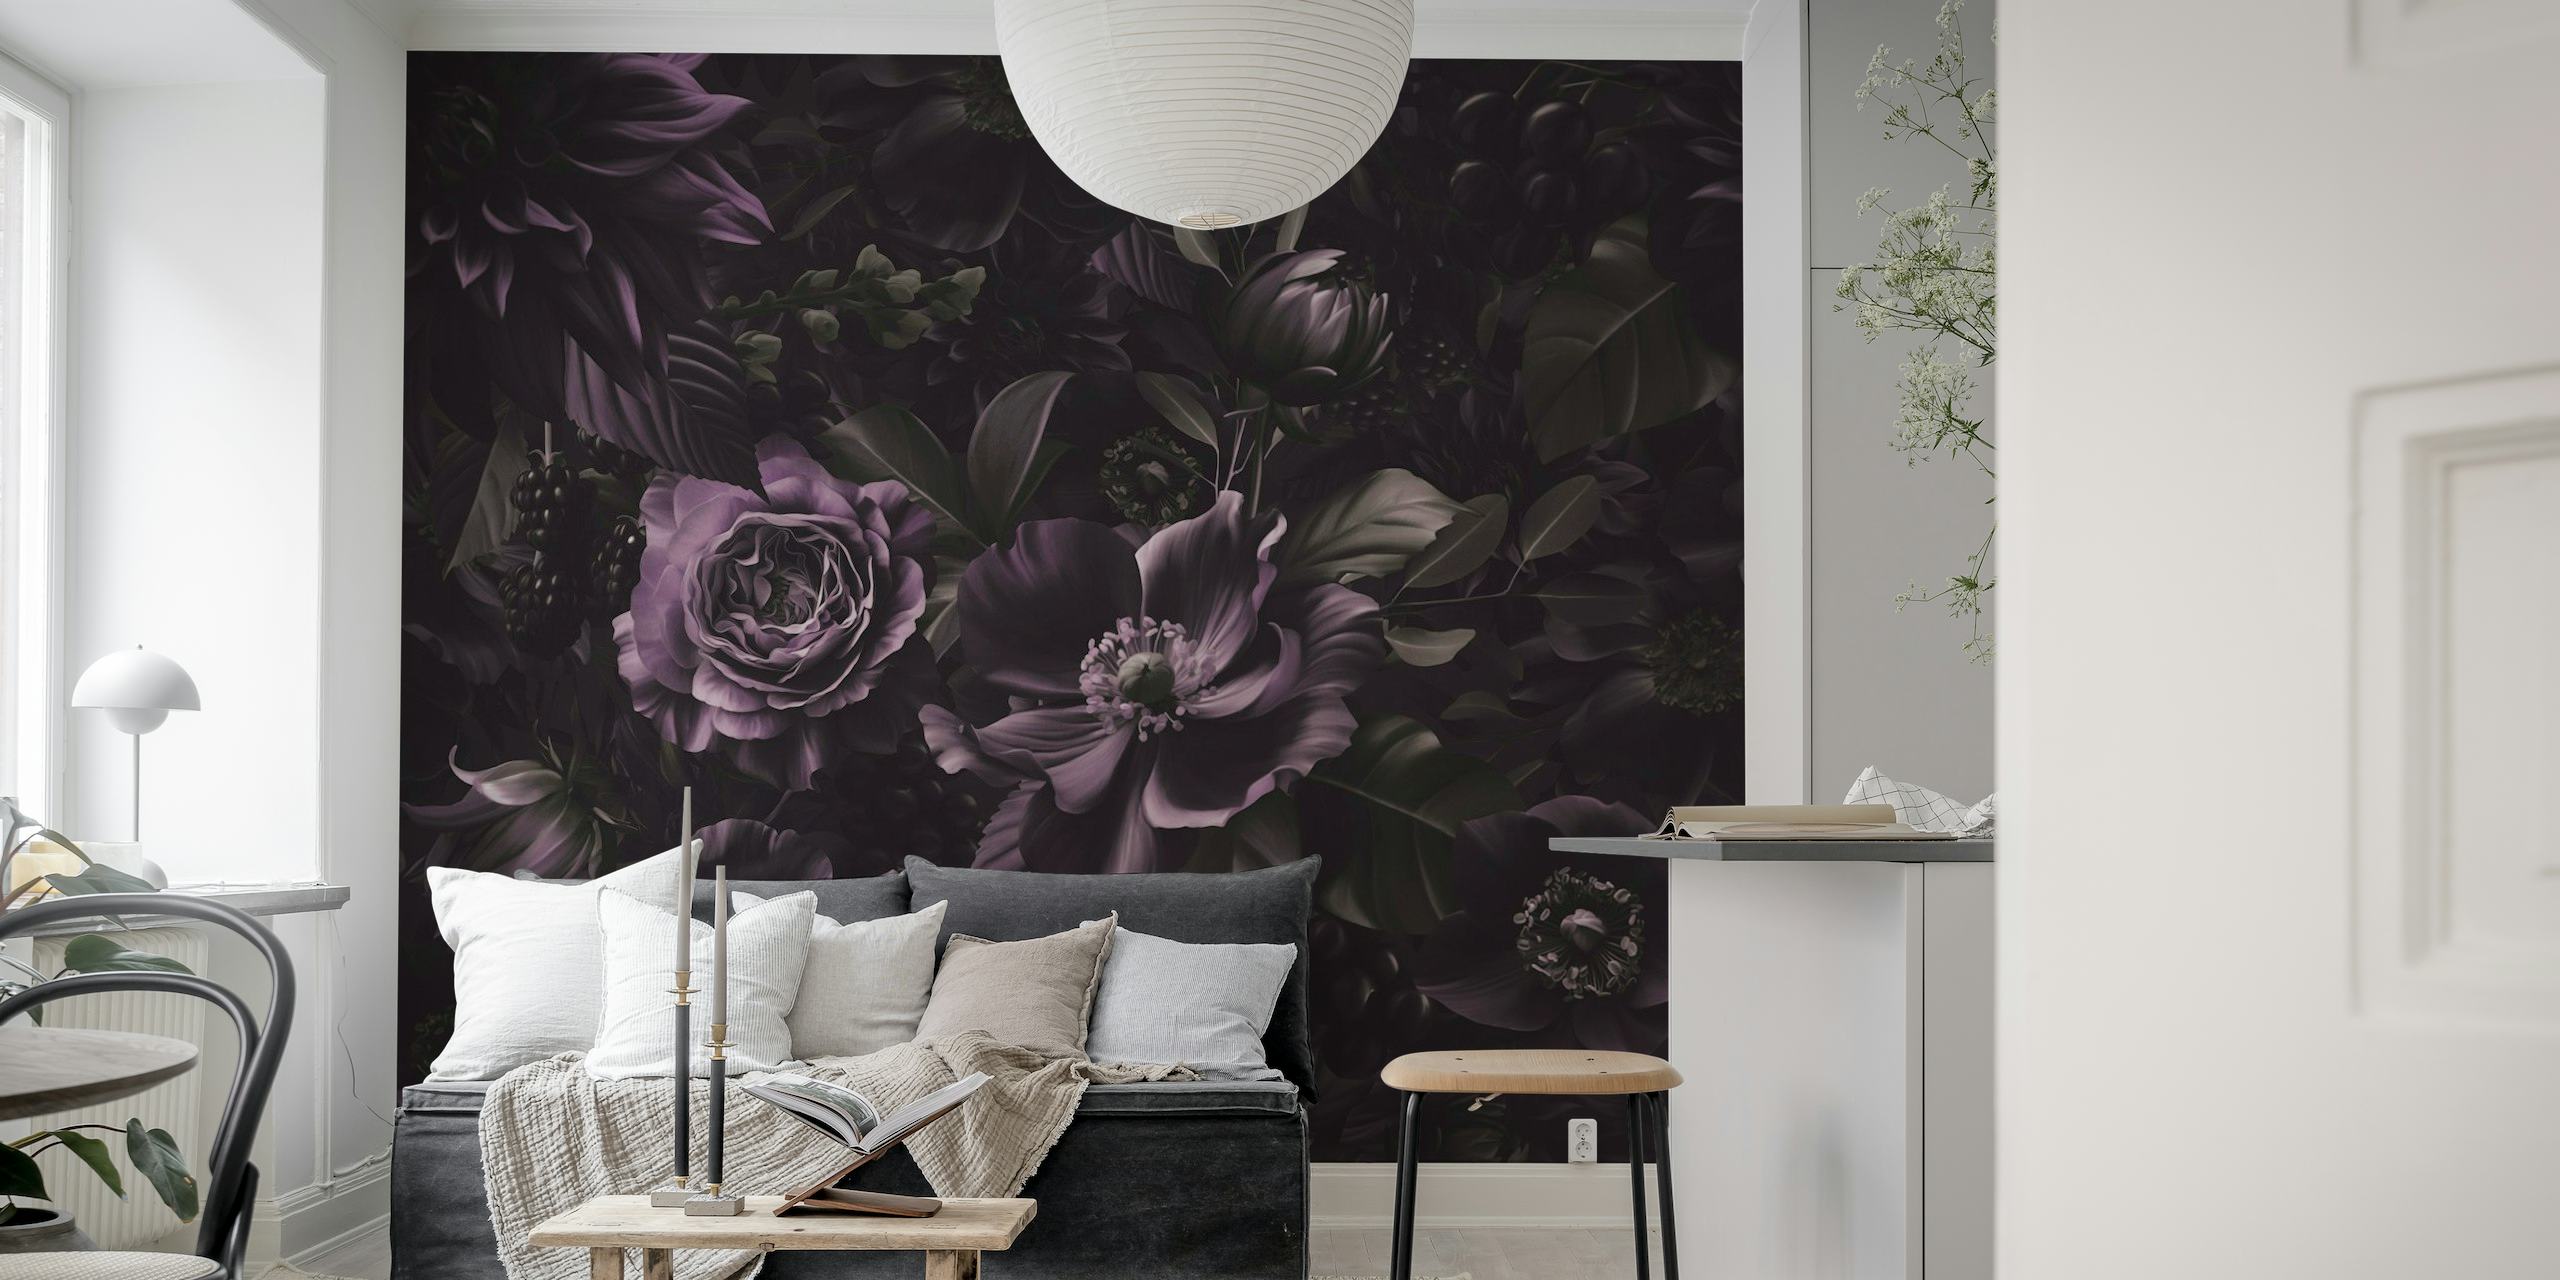 Opulent baroque-style flowers in shades of deep purple wall mural